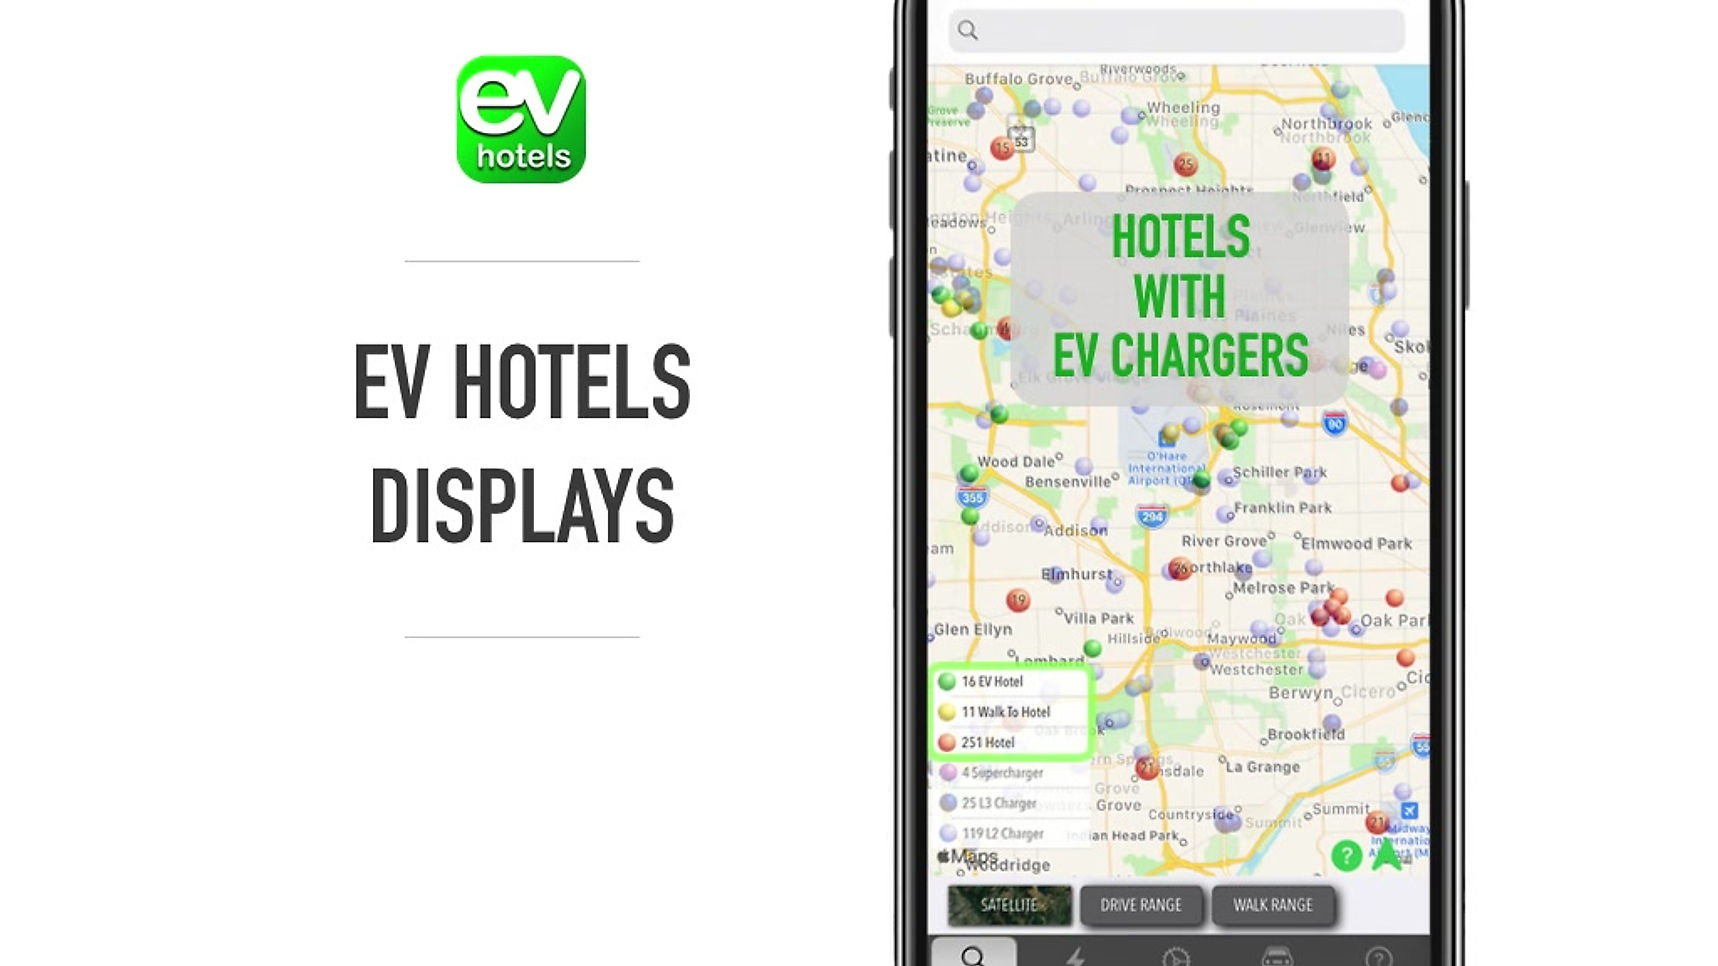 Quick Introduction to the EVHotels App